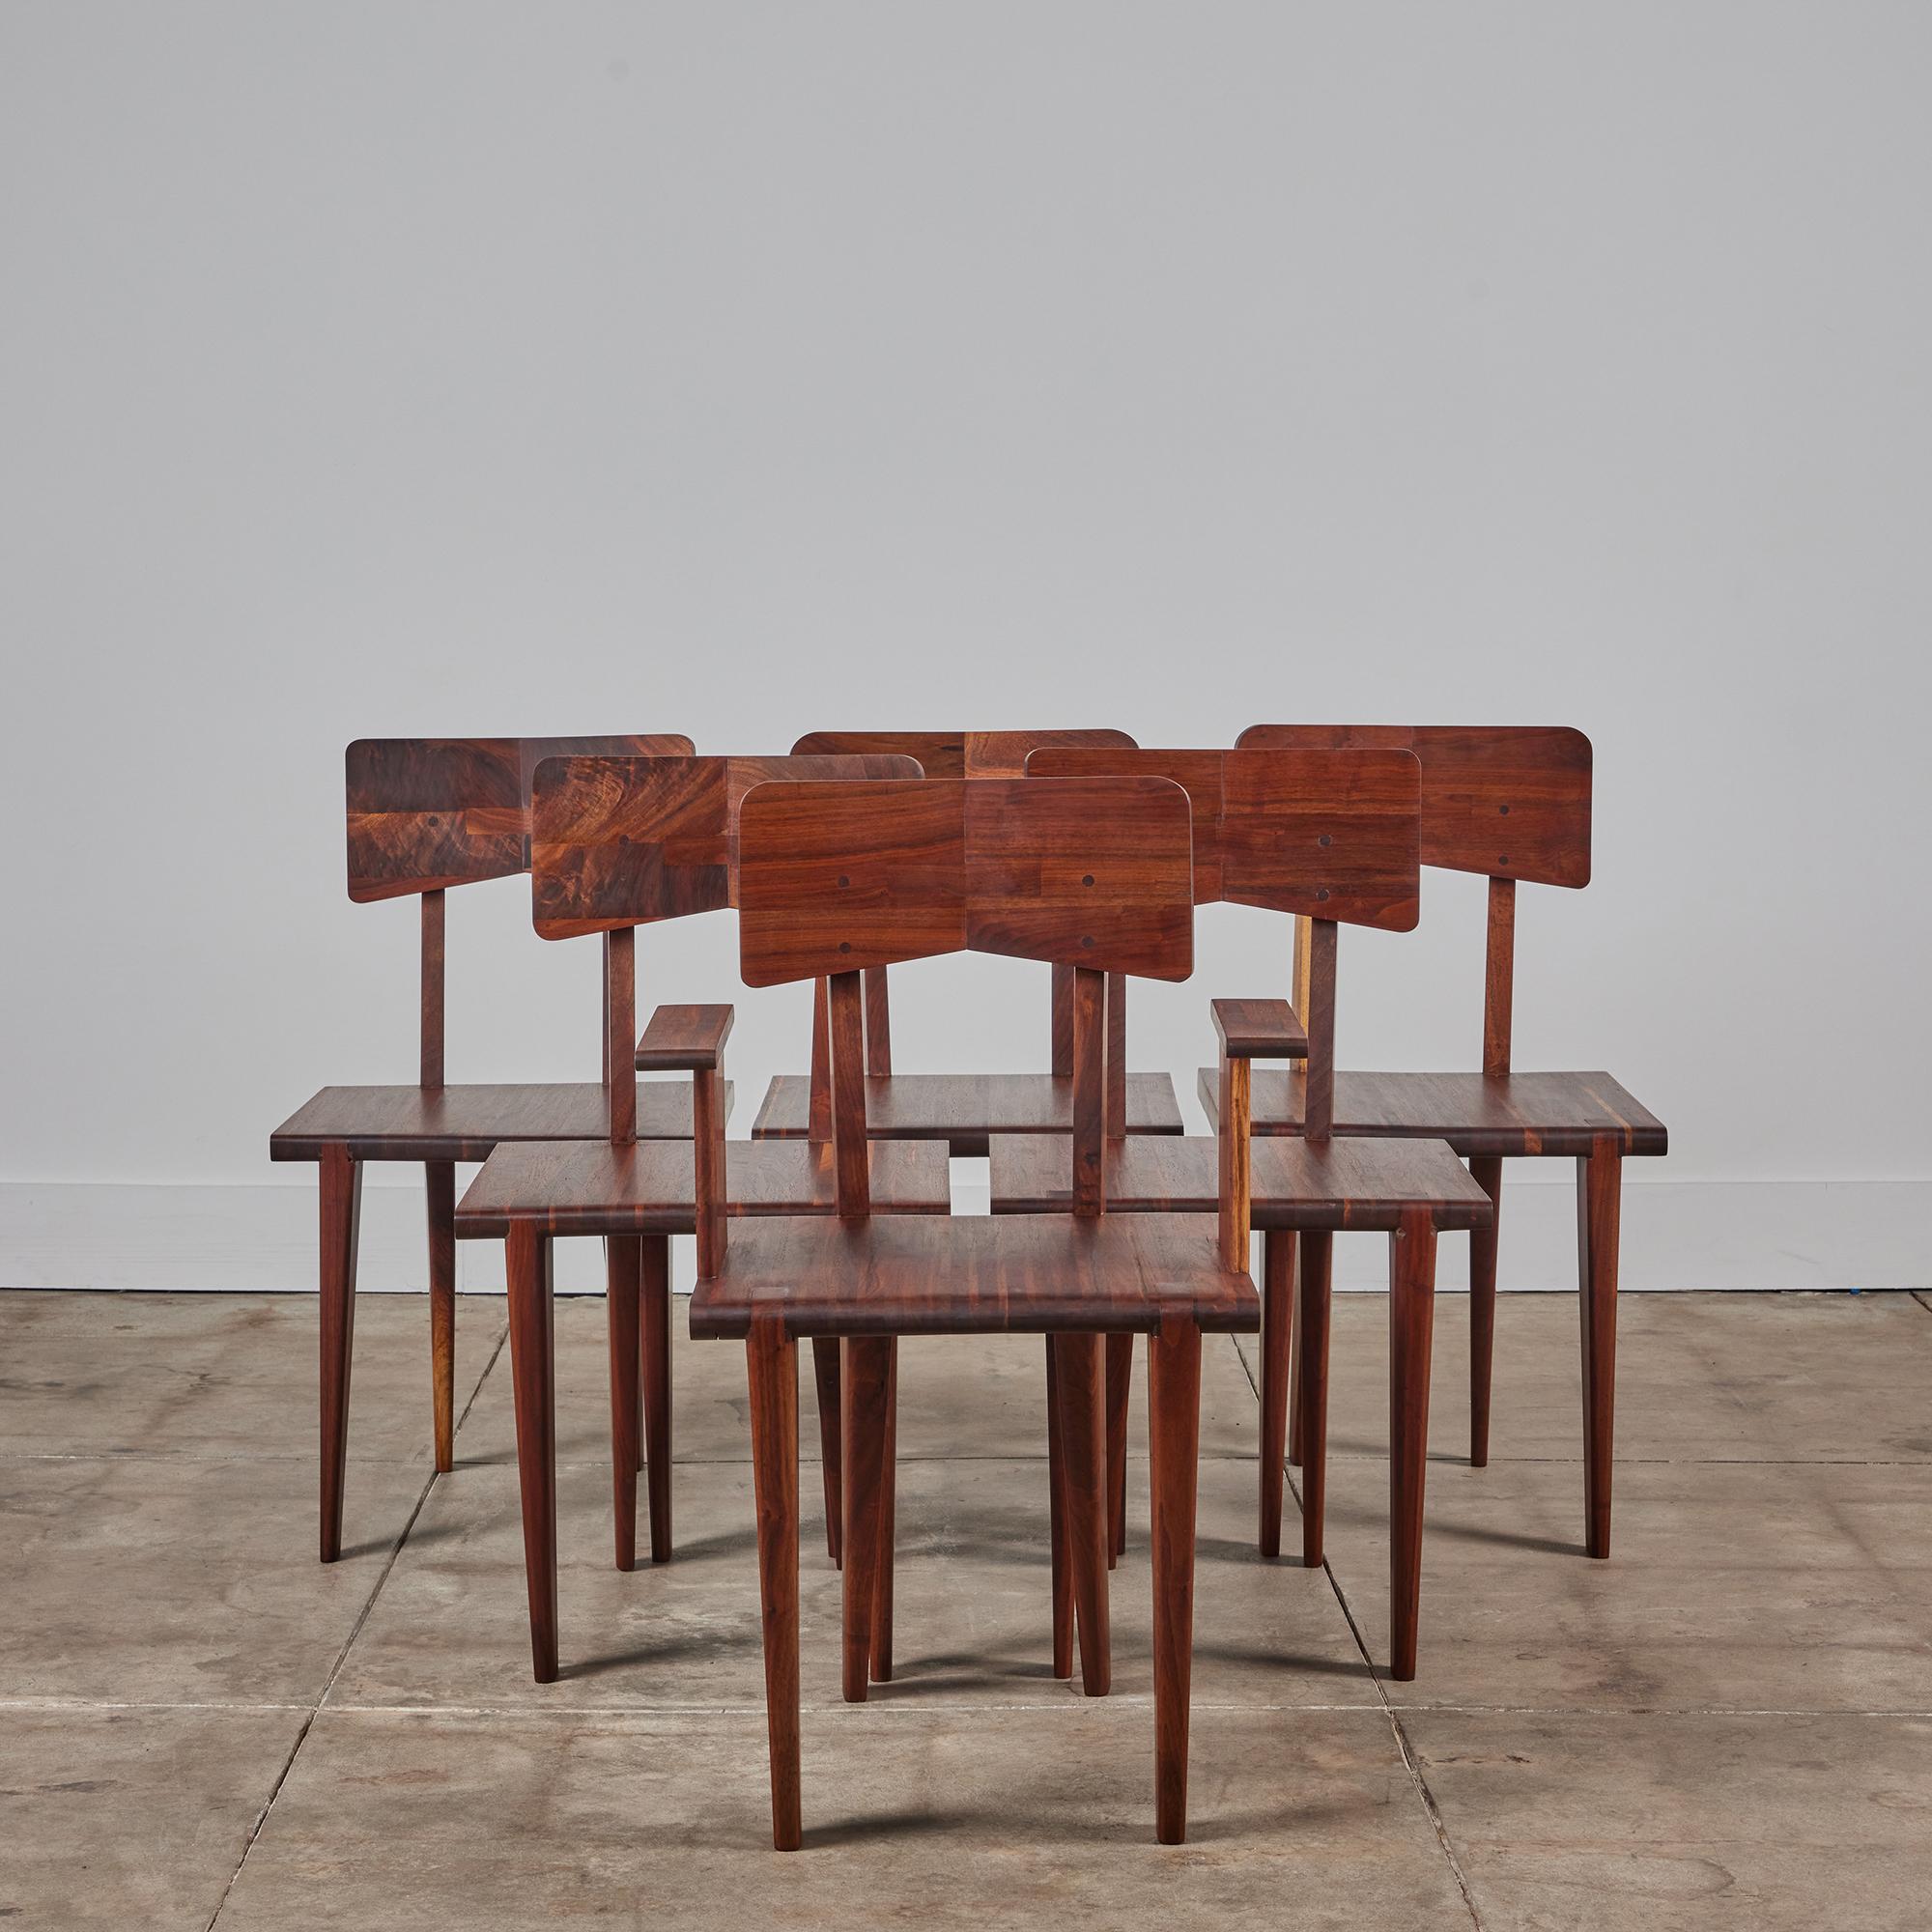 Designed in the style of French designer Jean Prouvé, this set of six studio craft dining chairs feature a solid walnut frame and beautiful geometric lines. Each unique seatback showcases beautiful dowel work that can also be seen on the side of